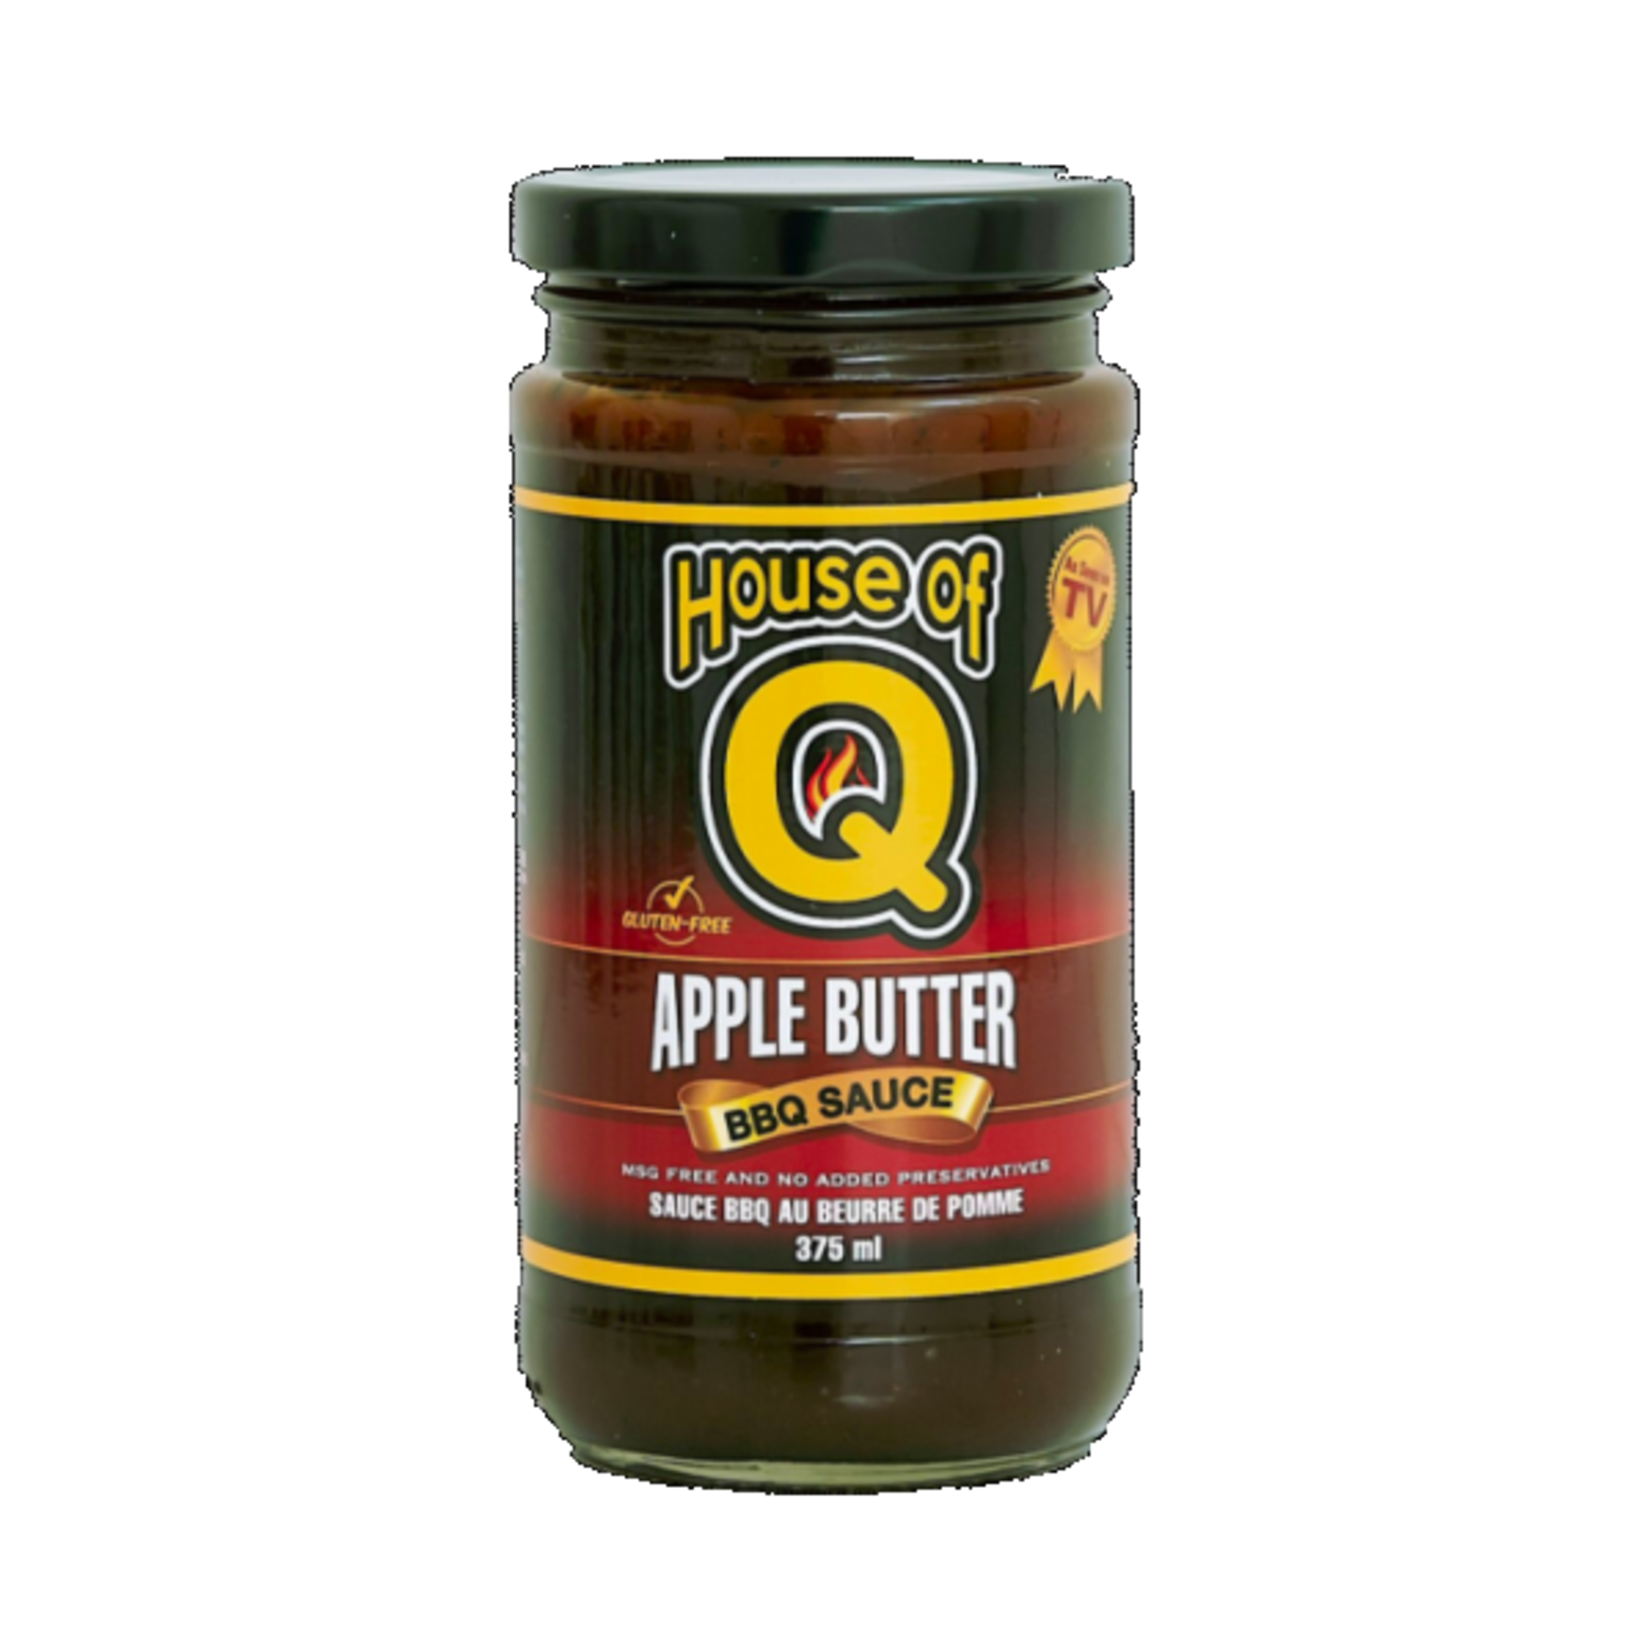 House of Q House of Q Apple Butter BBQ Sause